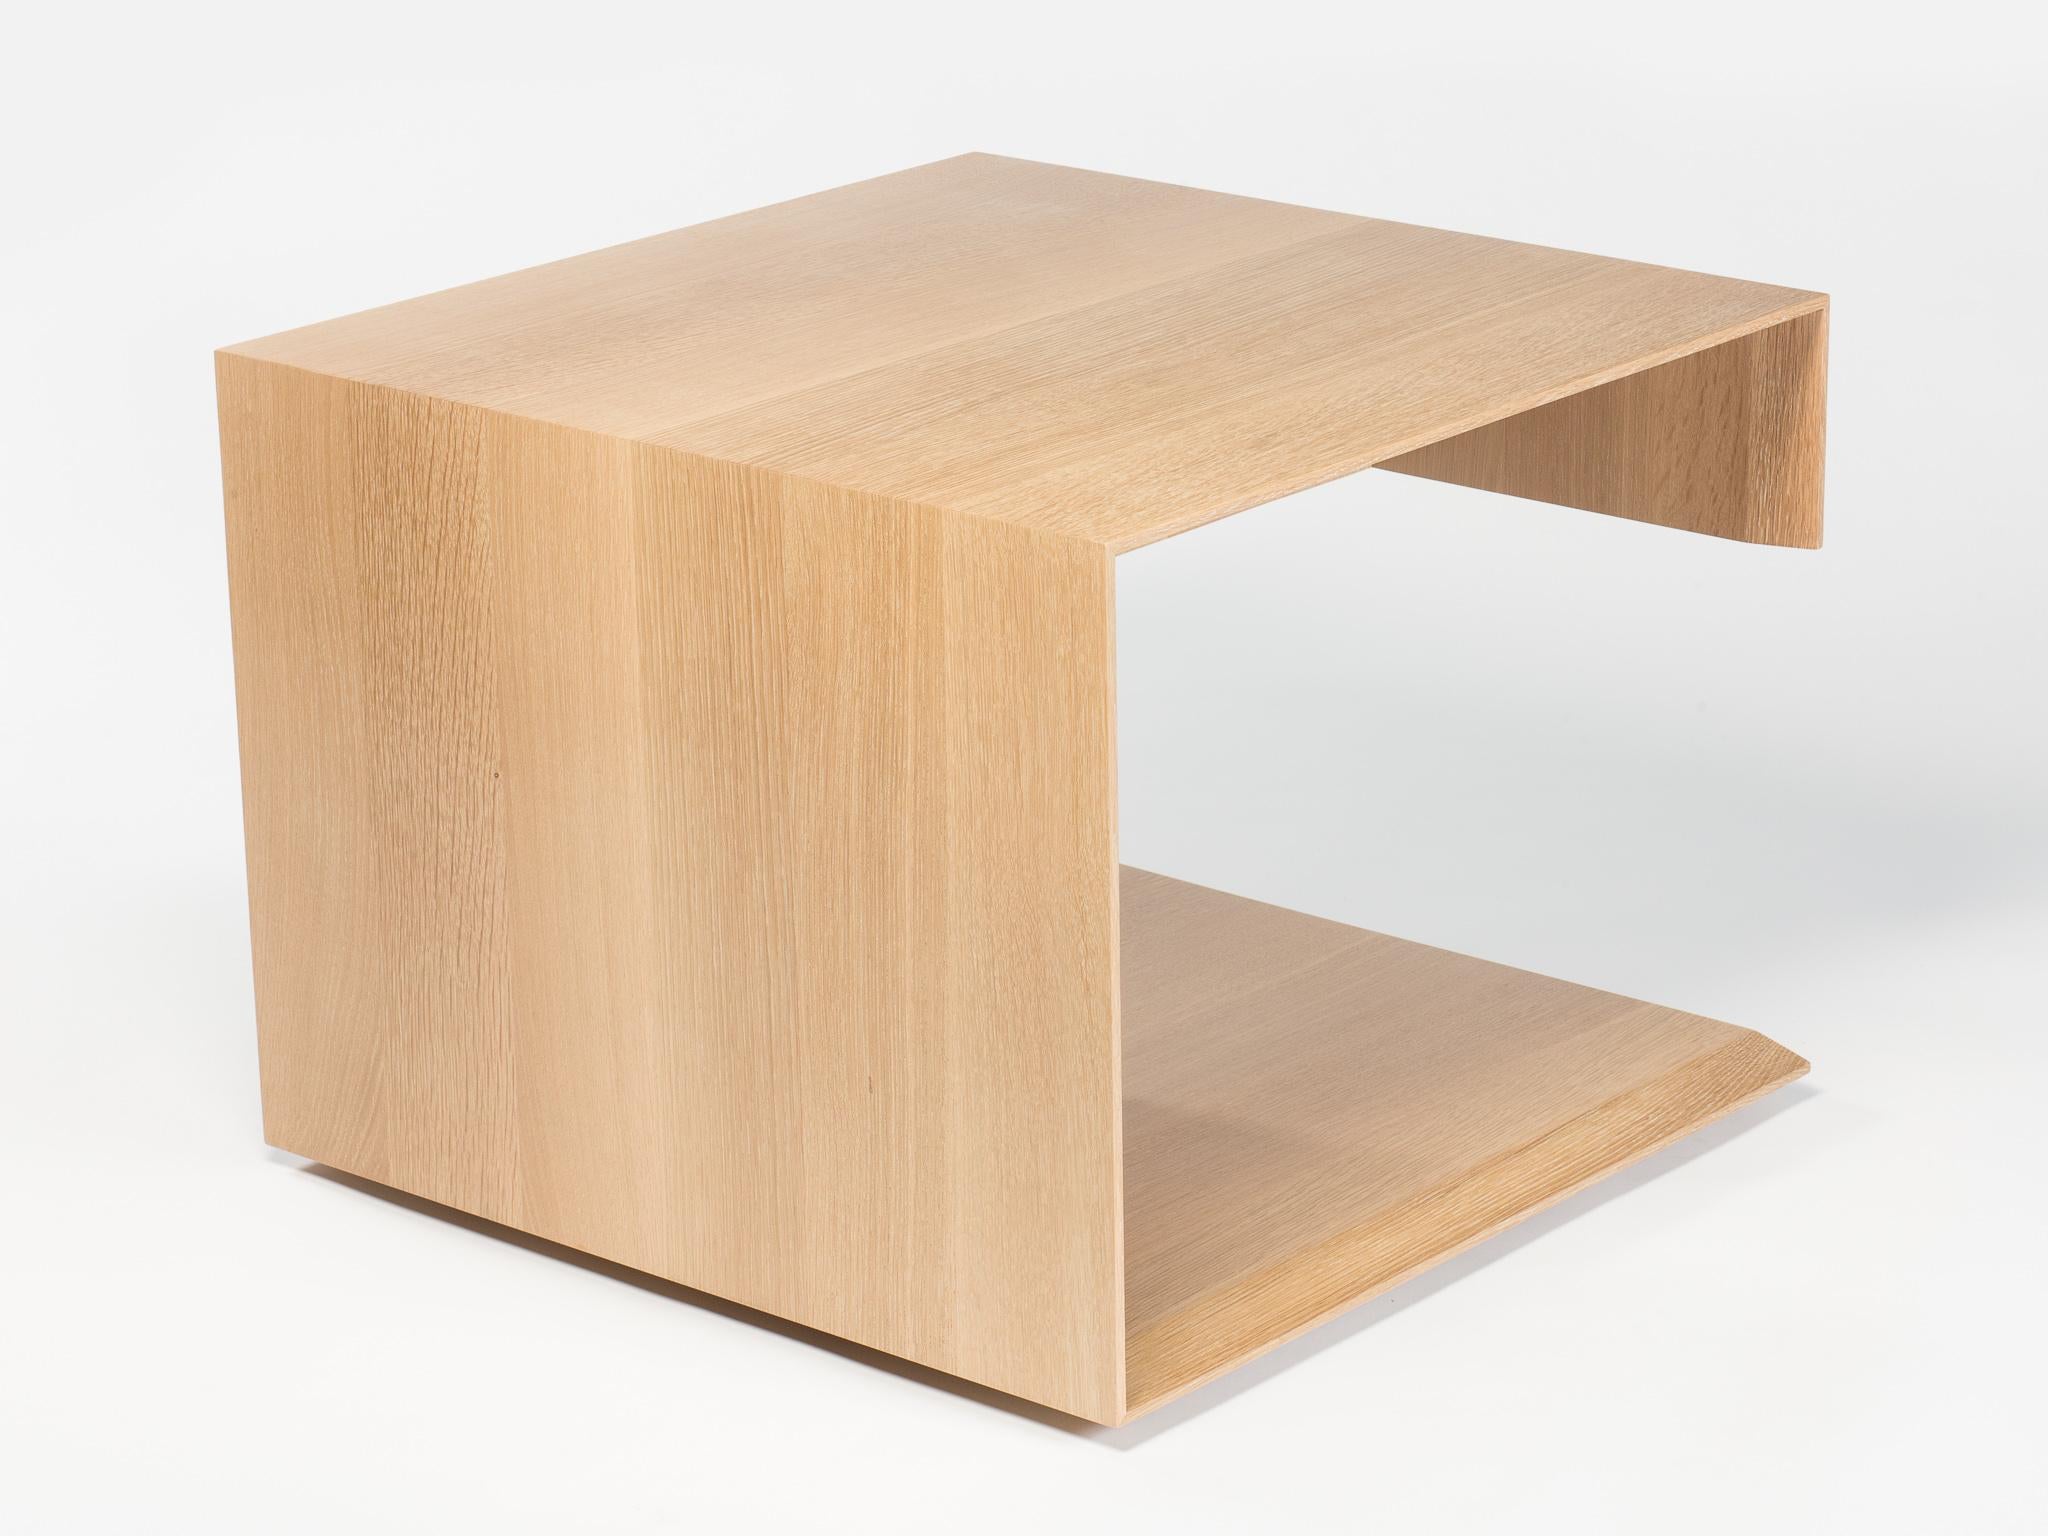 American Modern Wood End Table in Solid White Oak, by Studio DiPaolo For Sale